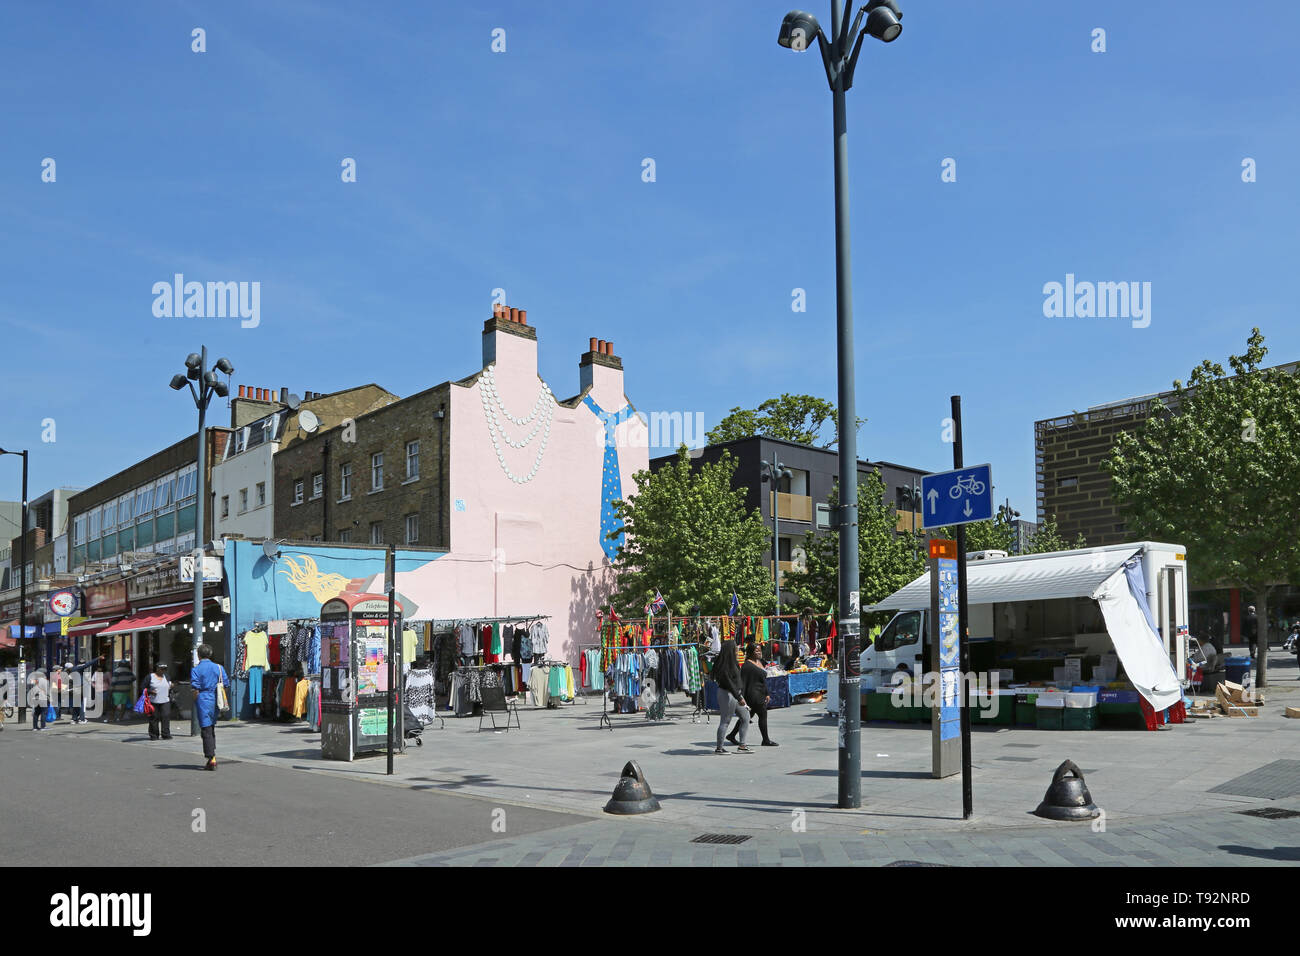 The famous street market on Deptford High Street, south London. An area of diversity and international culture. Stock Photo